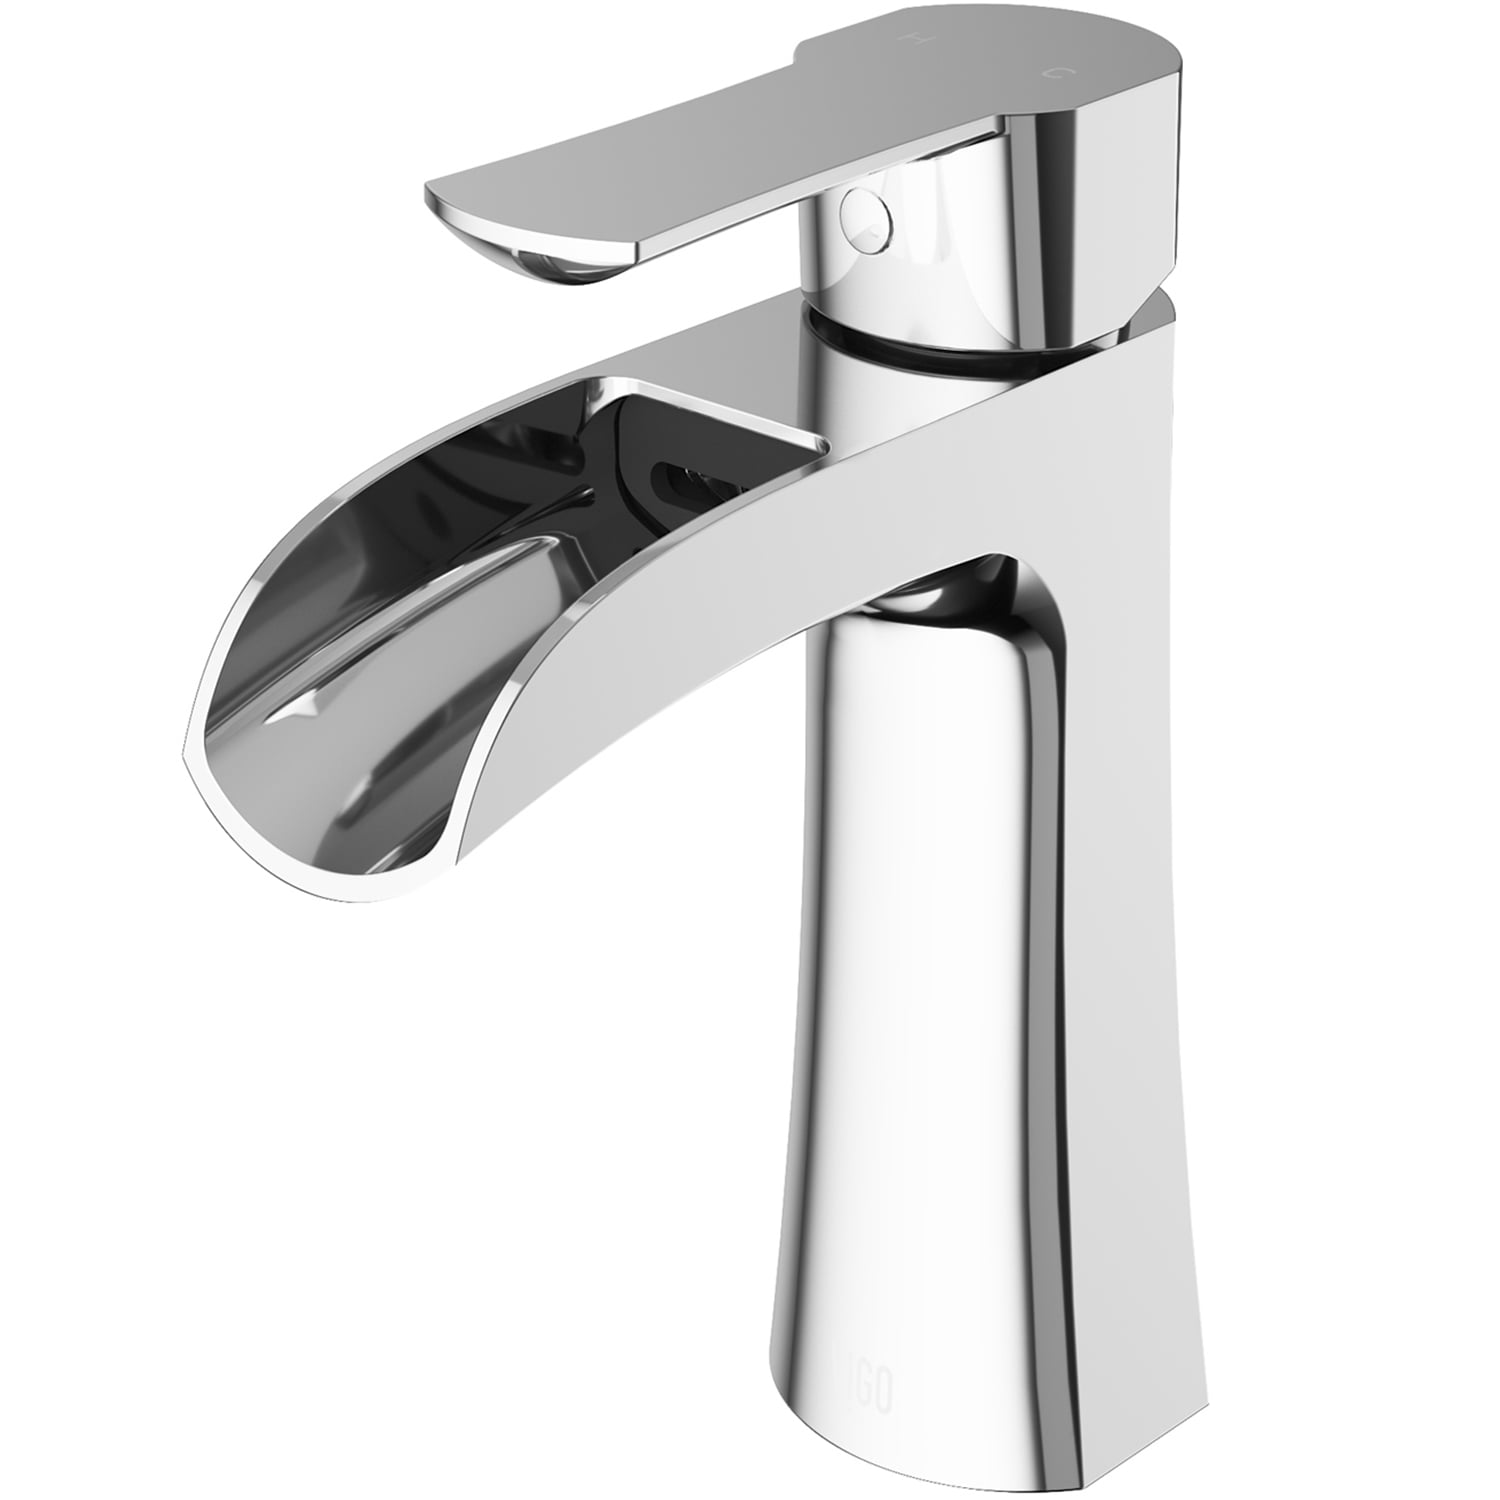 Details about   Pacific Bay Lynden Bathroom Faucet Chrome Plating Over ABS Plastic 